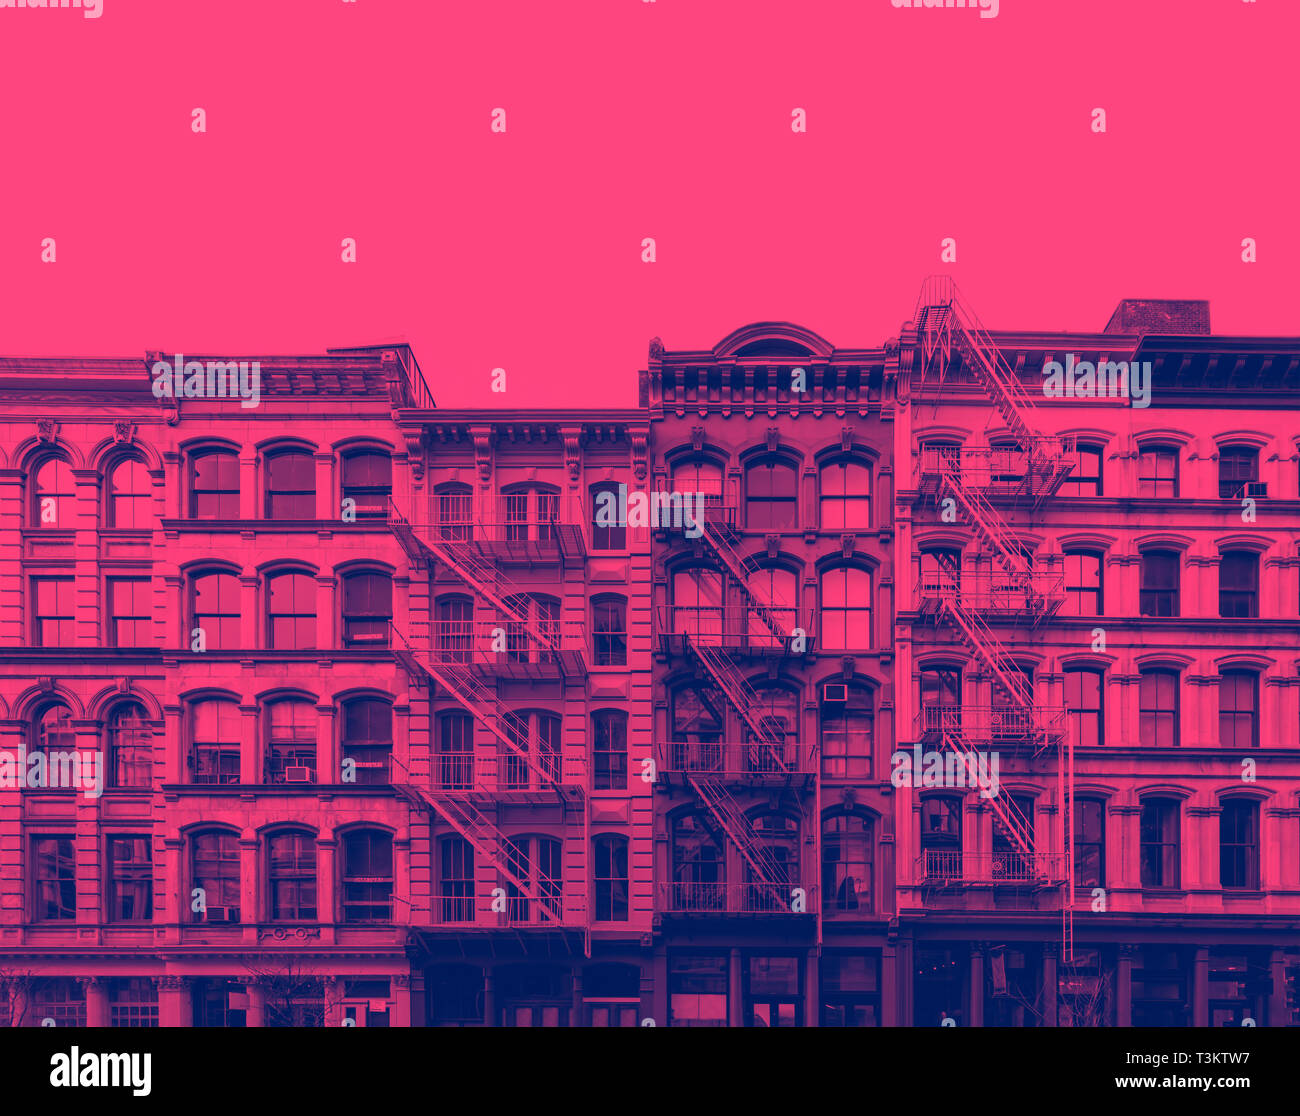 Exterior view of old buildings in SoHo New York City with pink and blue duotone color effect Stock Photo